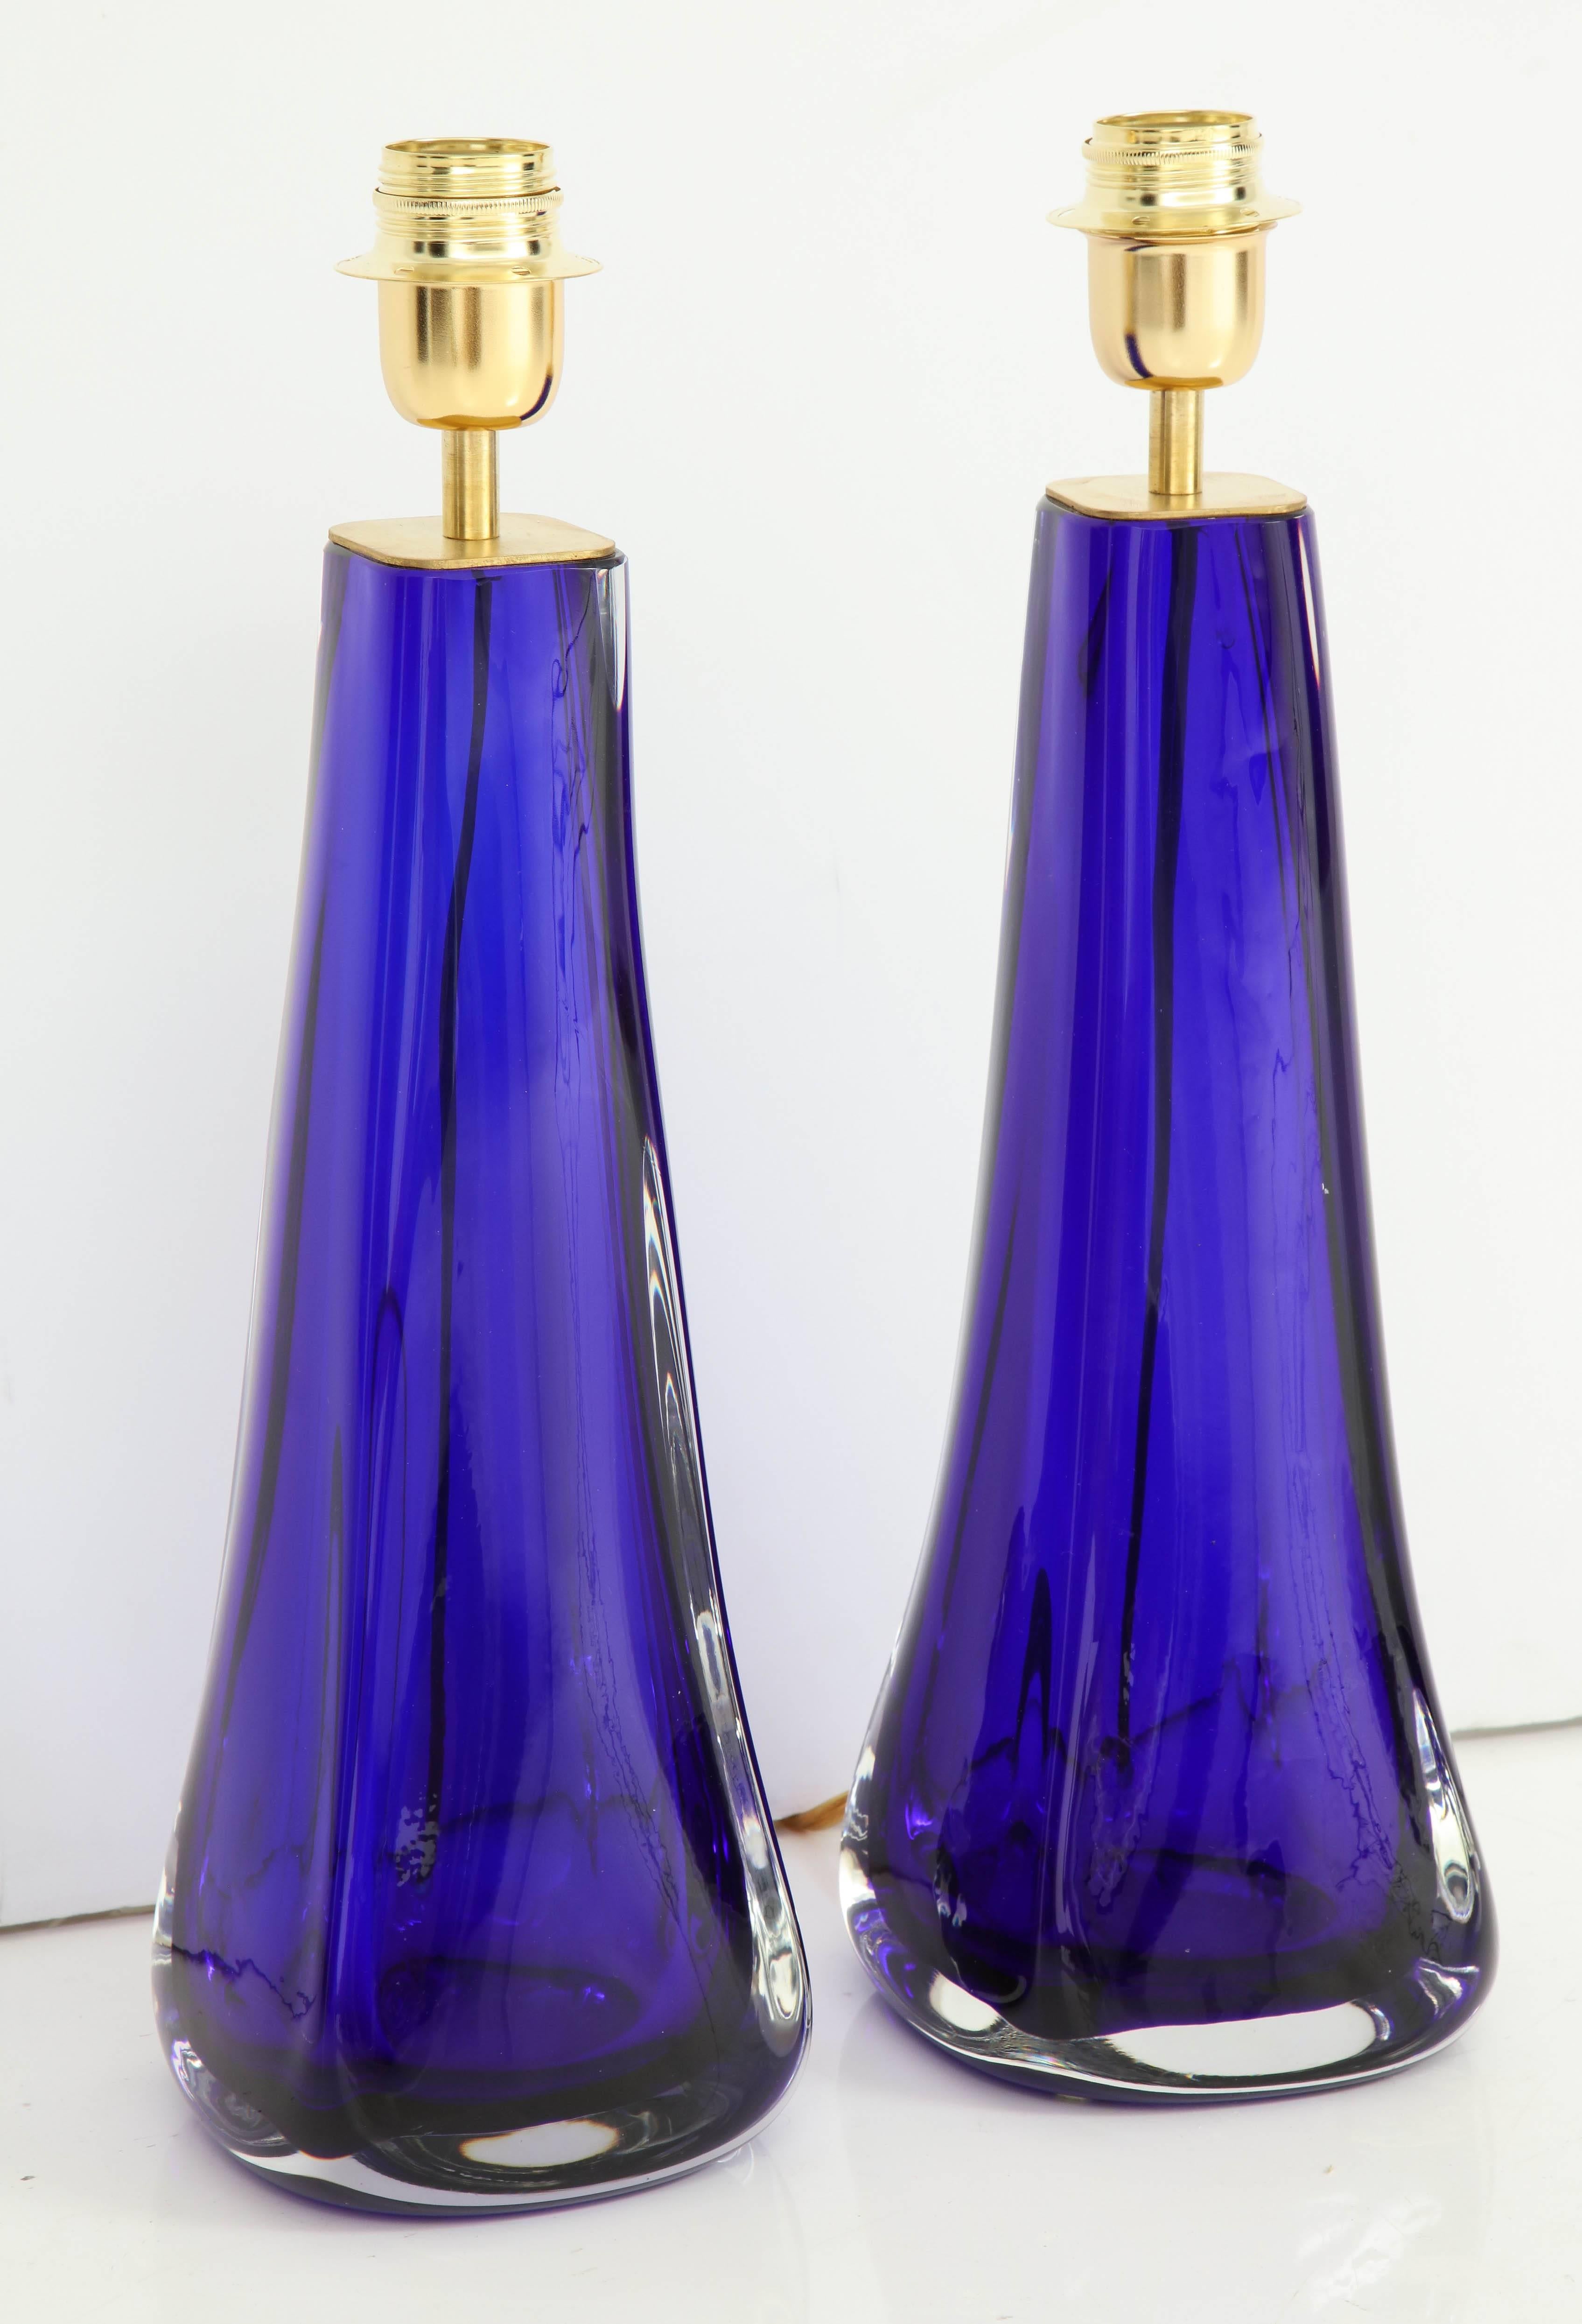 Pair of stunning Murano cobalt blue handblown glass lamps. These lamps have been made in the “Sommerso” technique. The height to the top of the glass is 14.75”. Sommerso (lit. "submerged" in Italian), or "sunken glasses", is a